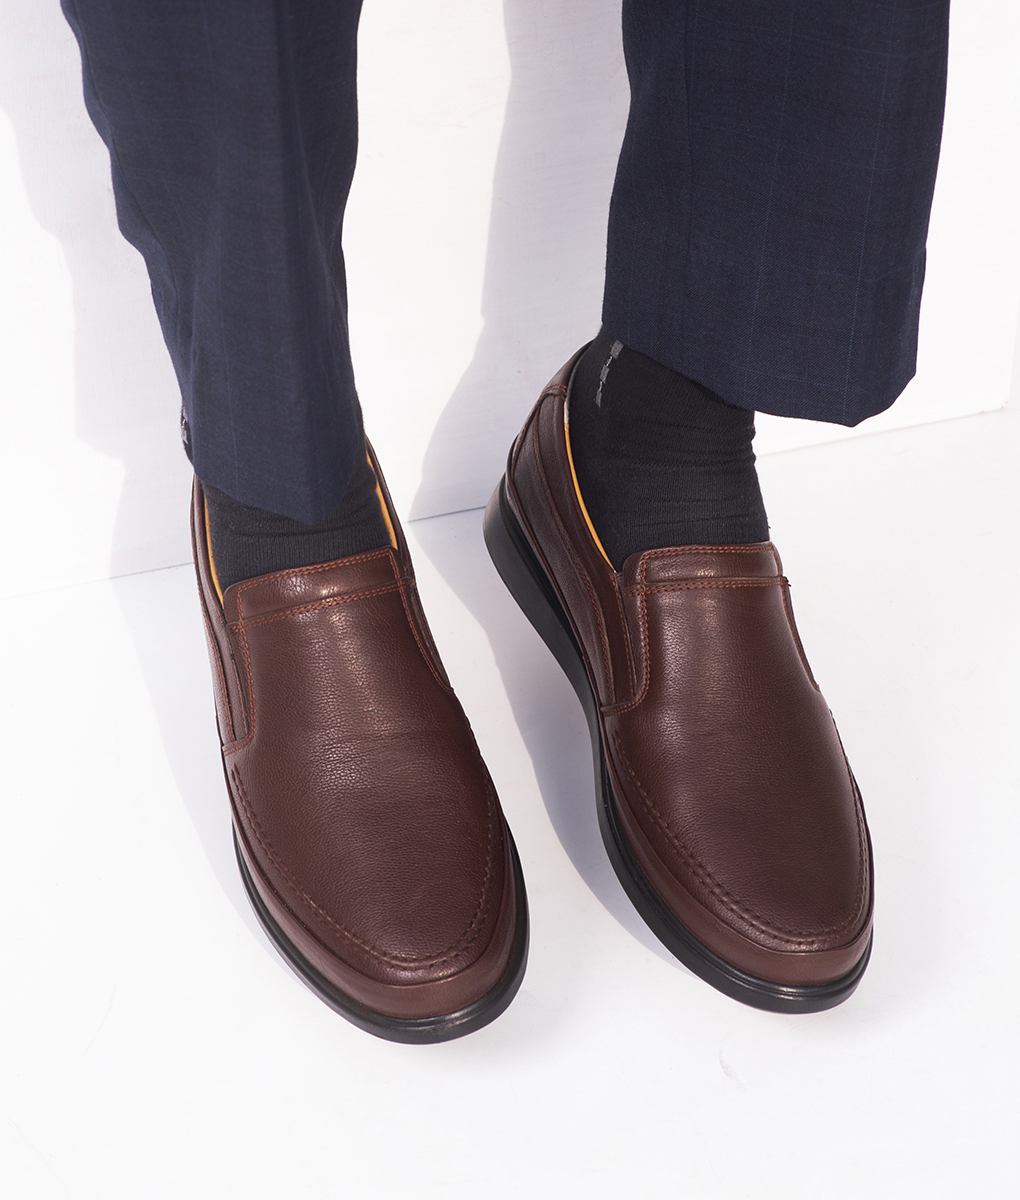 Dark Brown Grainy Leather Shoes for Men